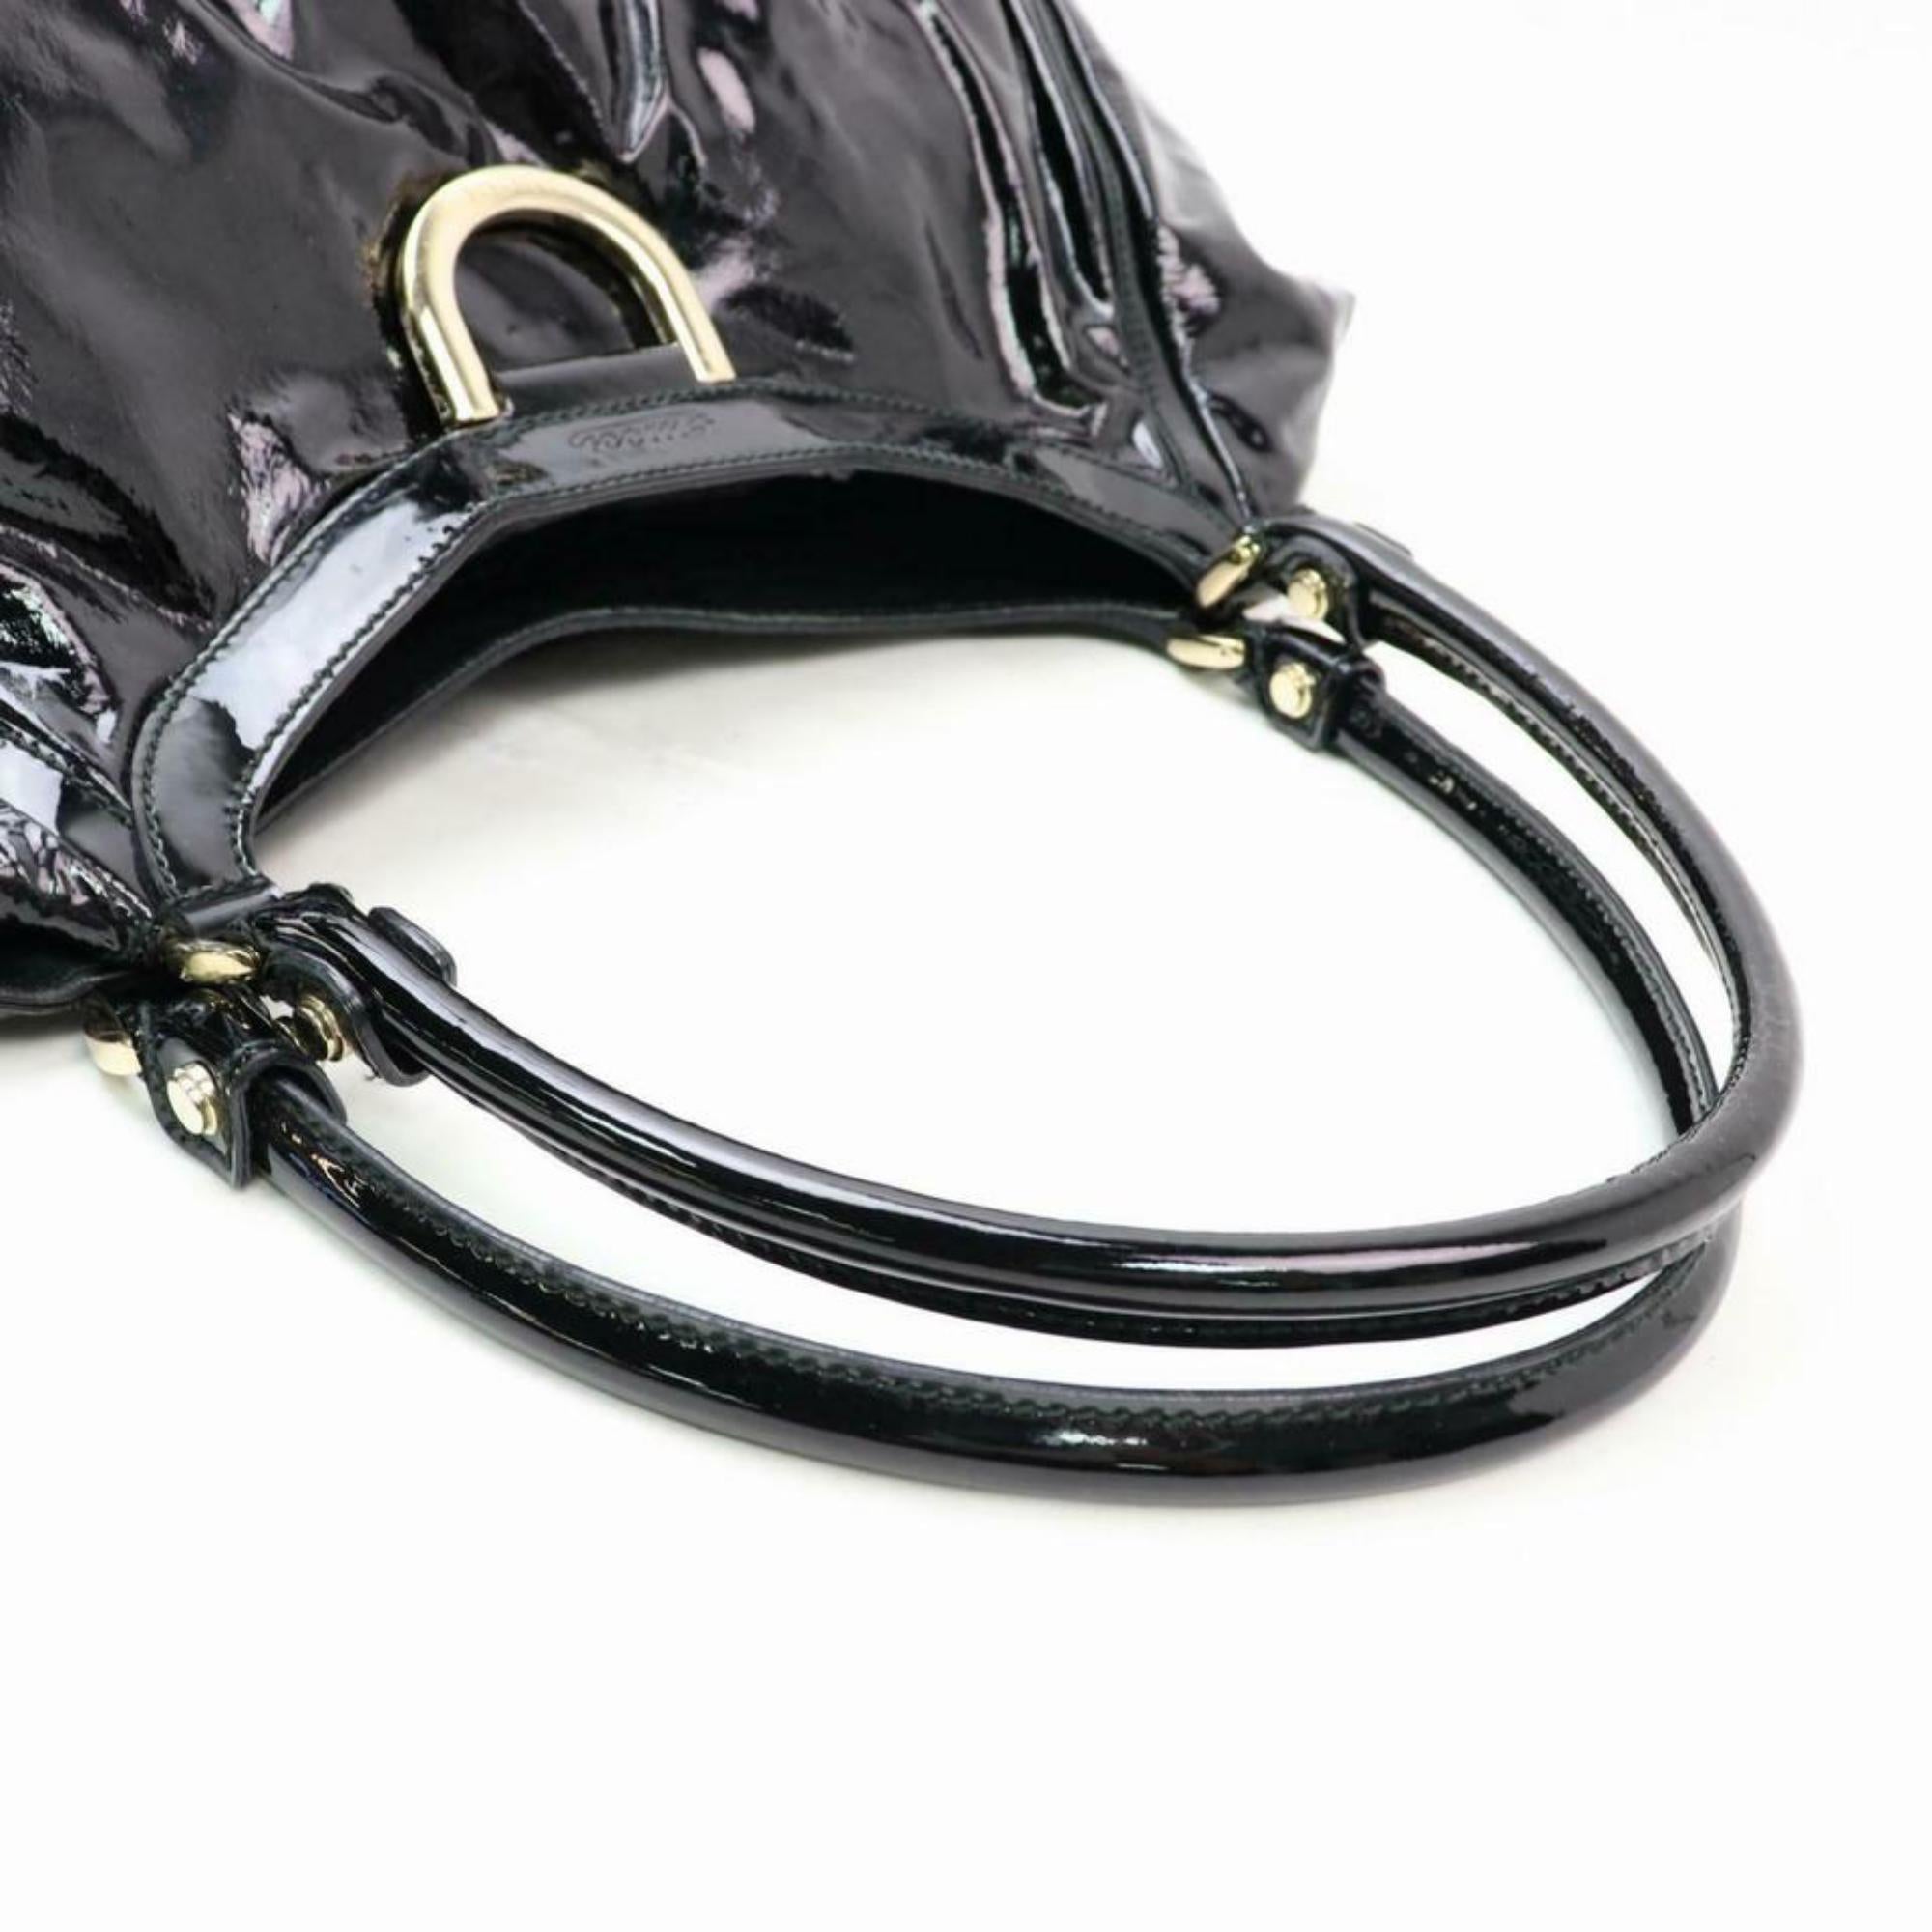 Gucci Abbey D-ring Hobo 870263 Black Patent Leather Satchel For Sale 7